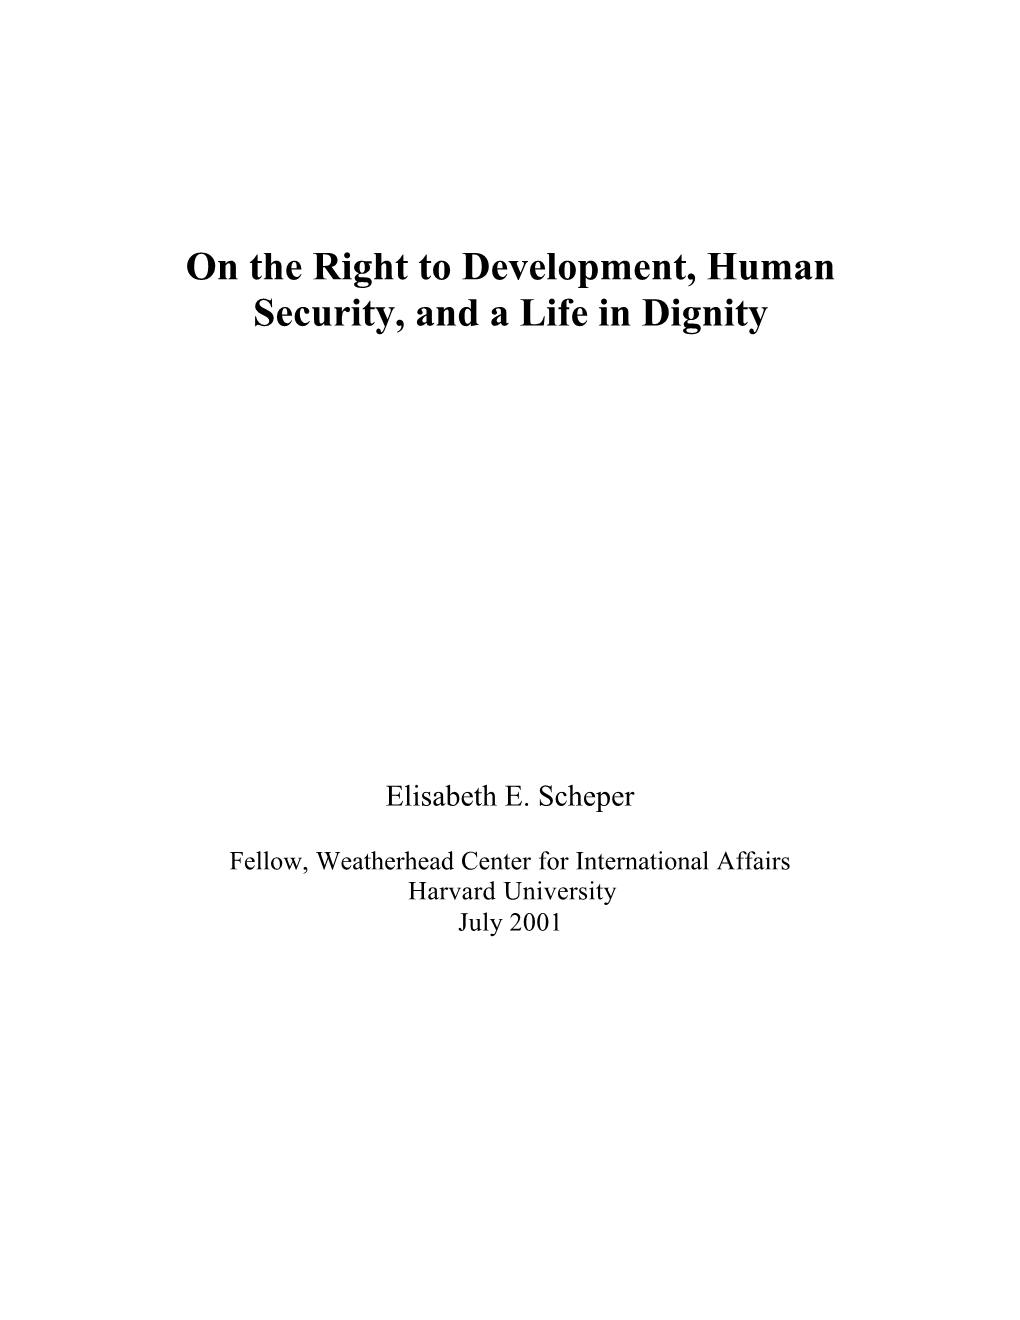 On the Right to Development, Human Security, and a Life in Dignity